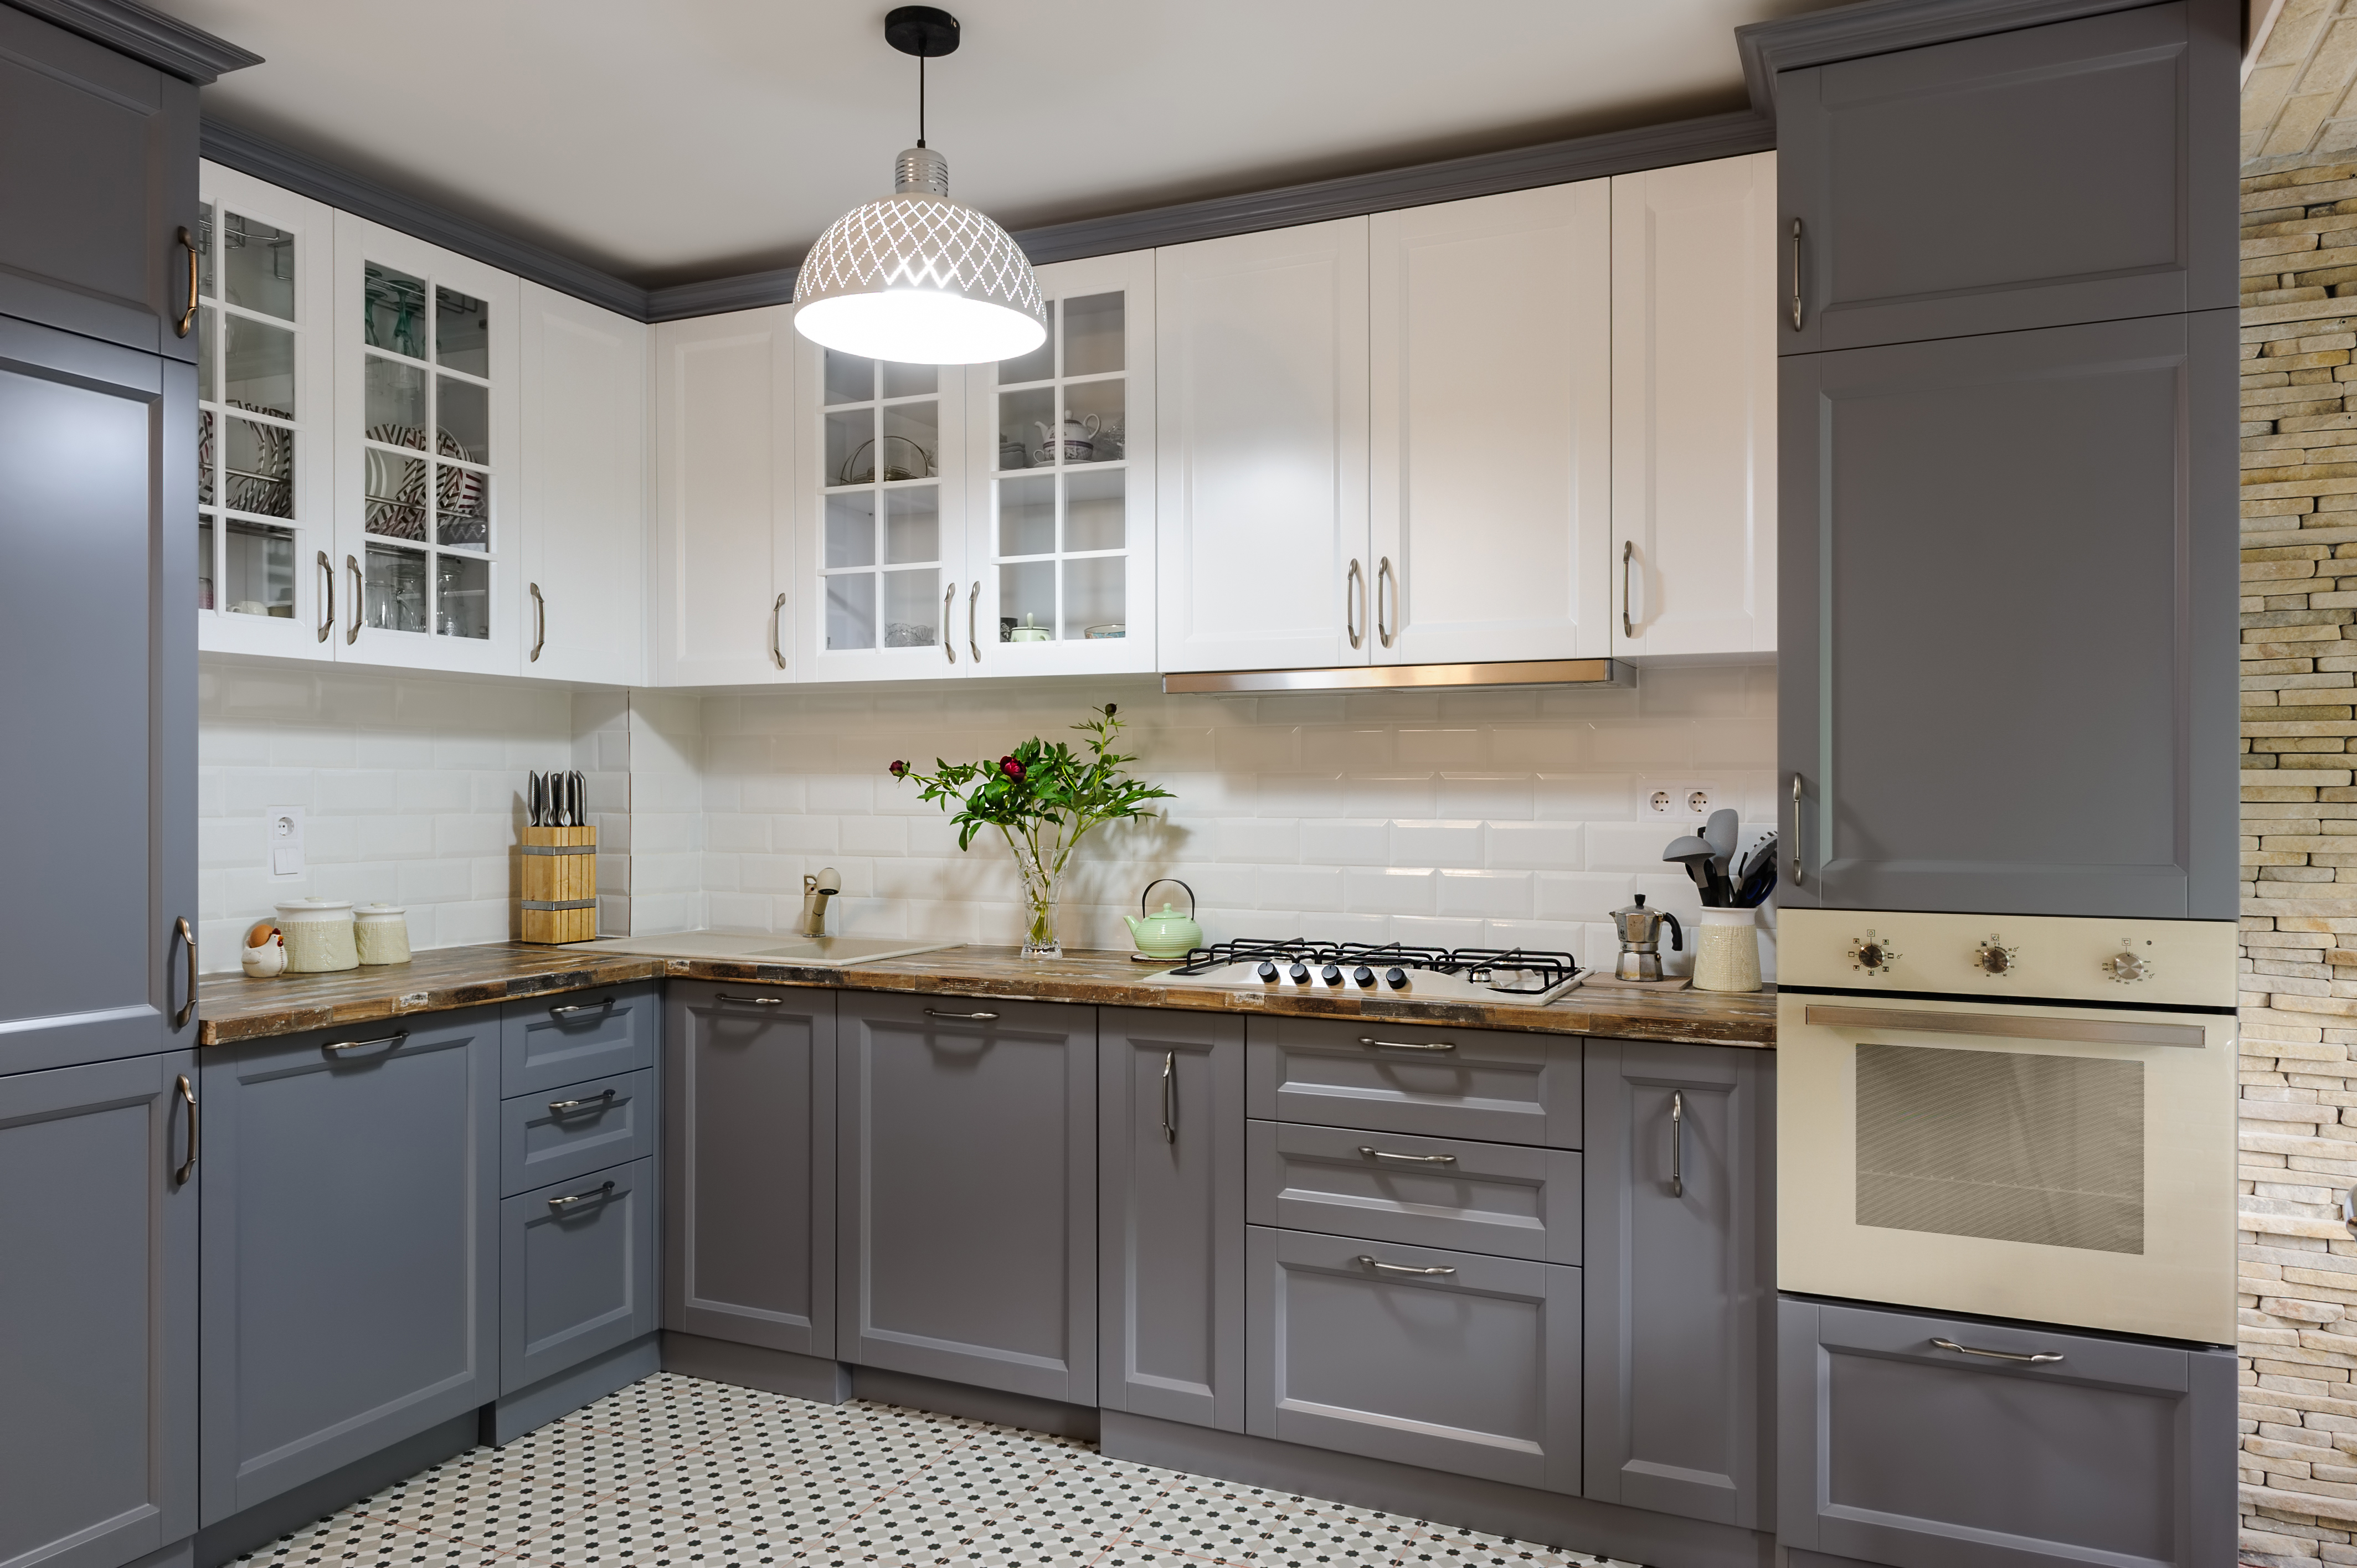 Buying Appliances/Fixtures for Your Kitchen-Specialty Home Improvement